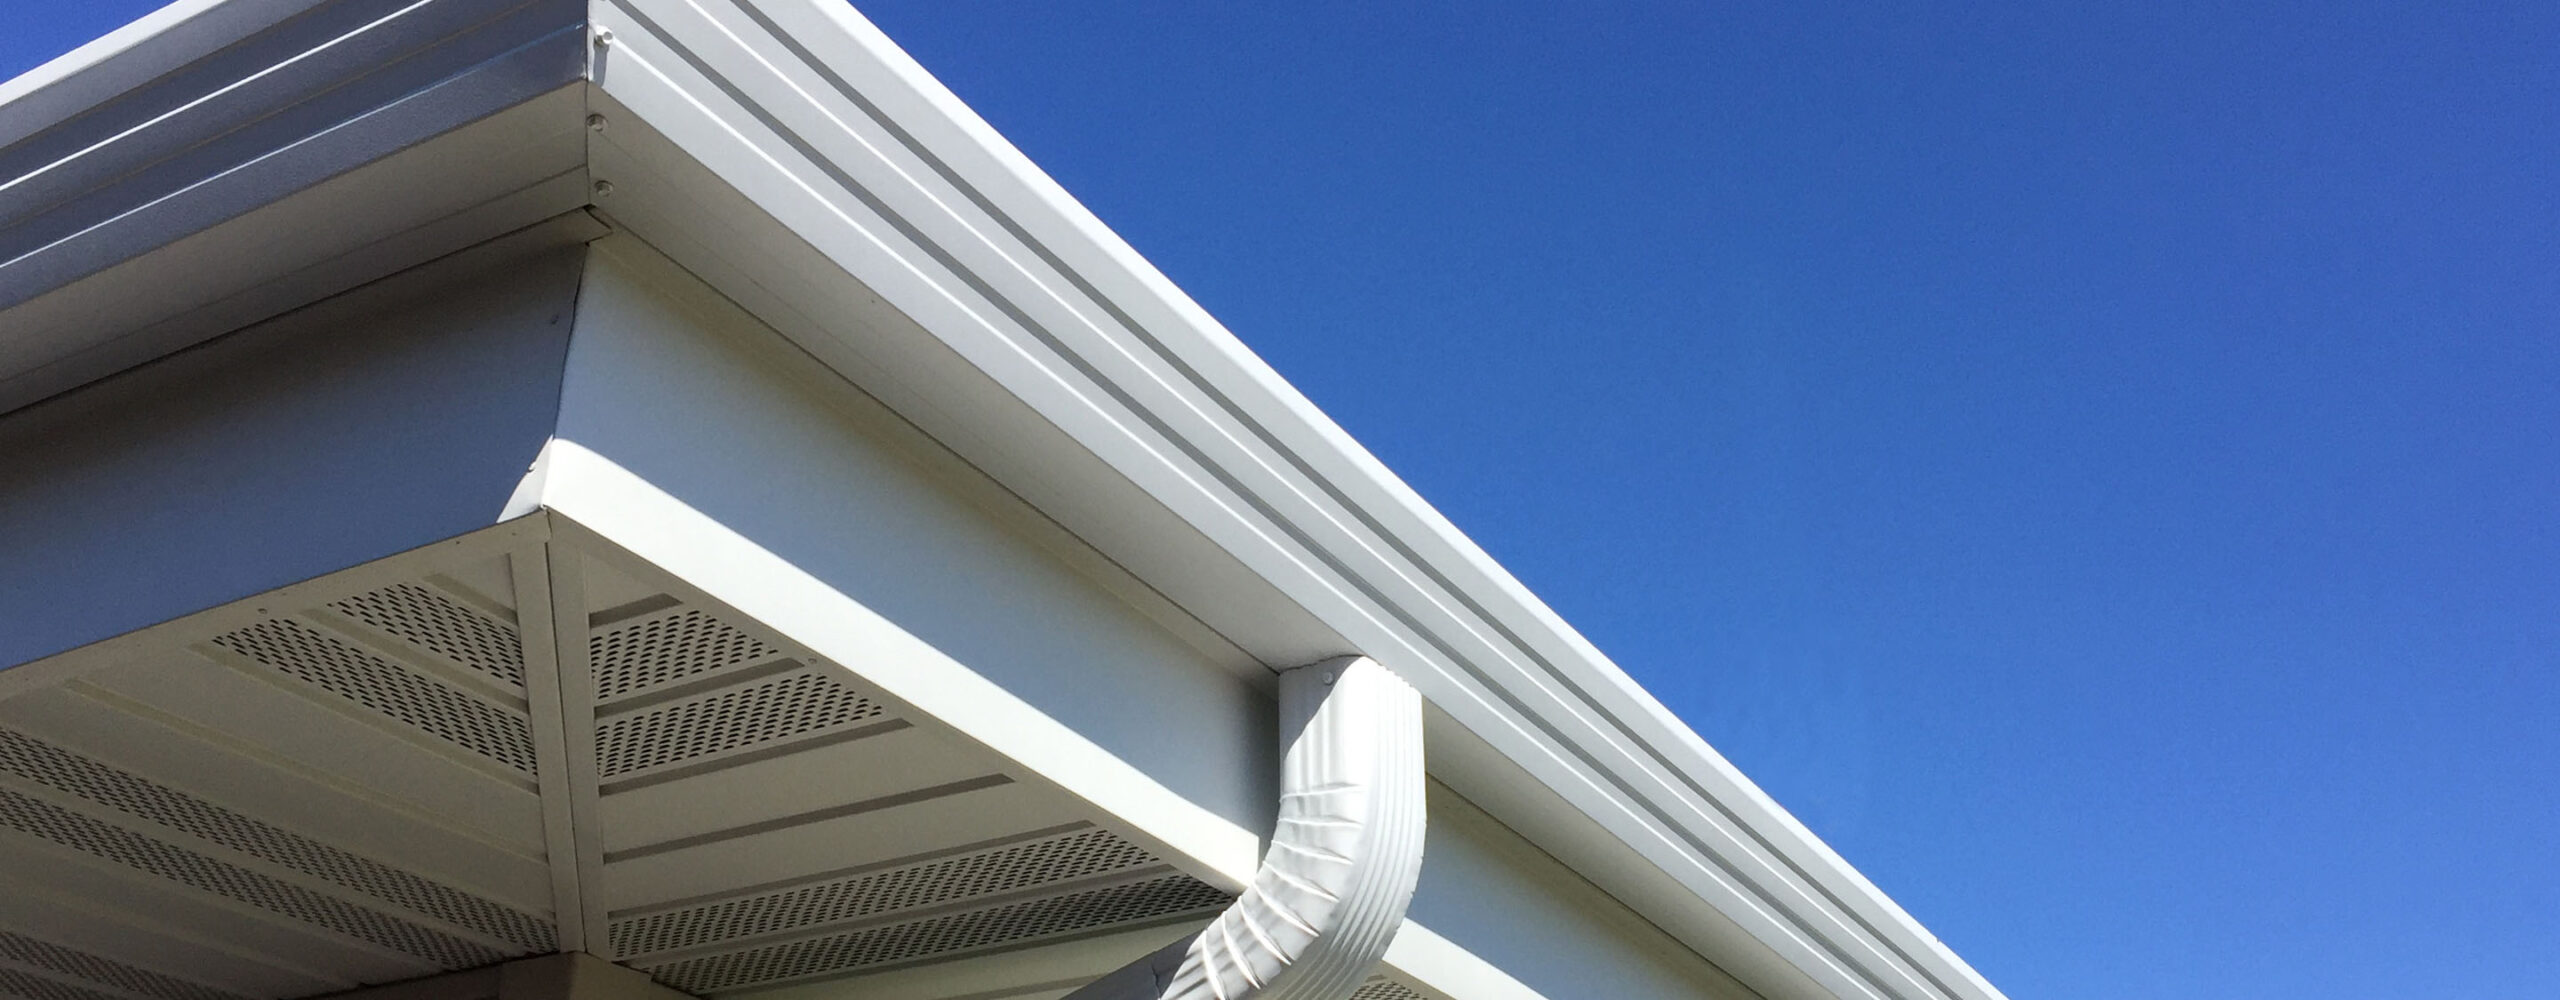 Gutter Replacement Installation Repair Delaware Pennsylvaia New Jersey Maryland